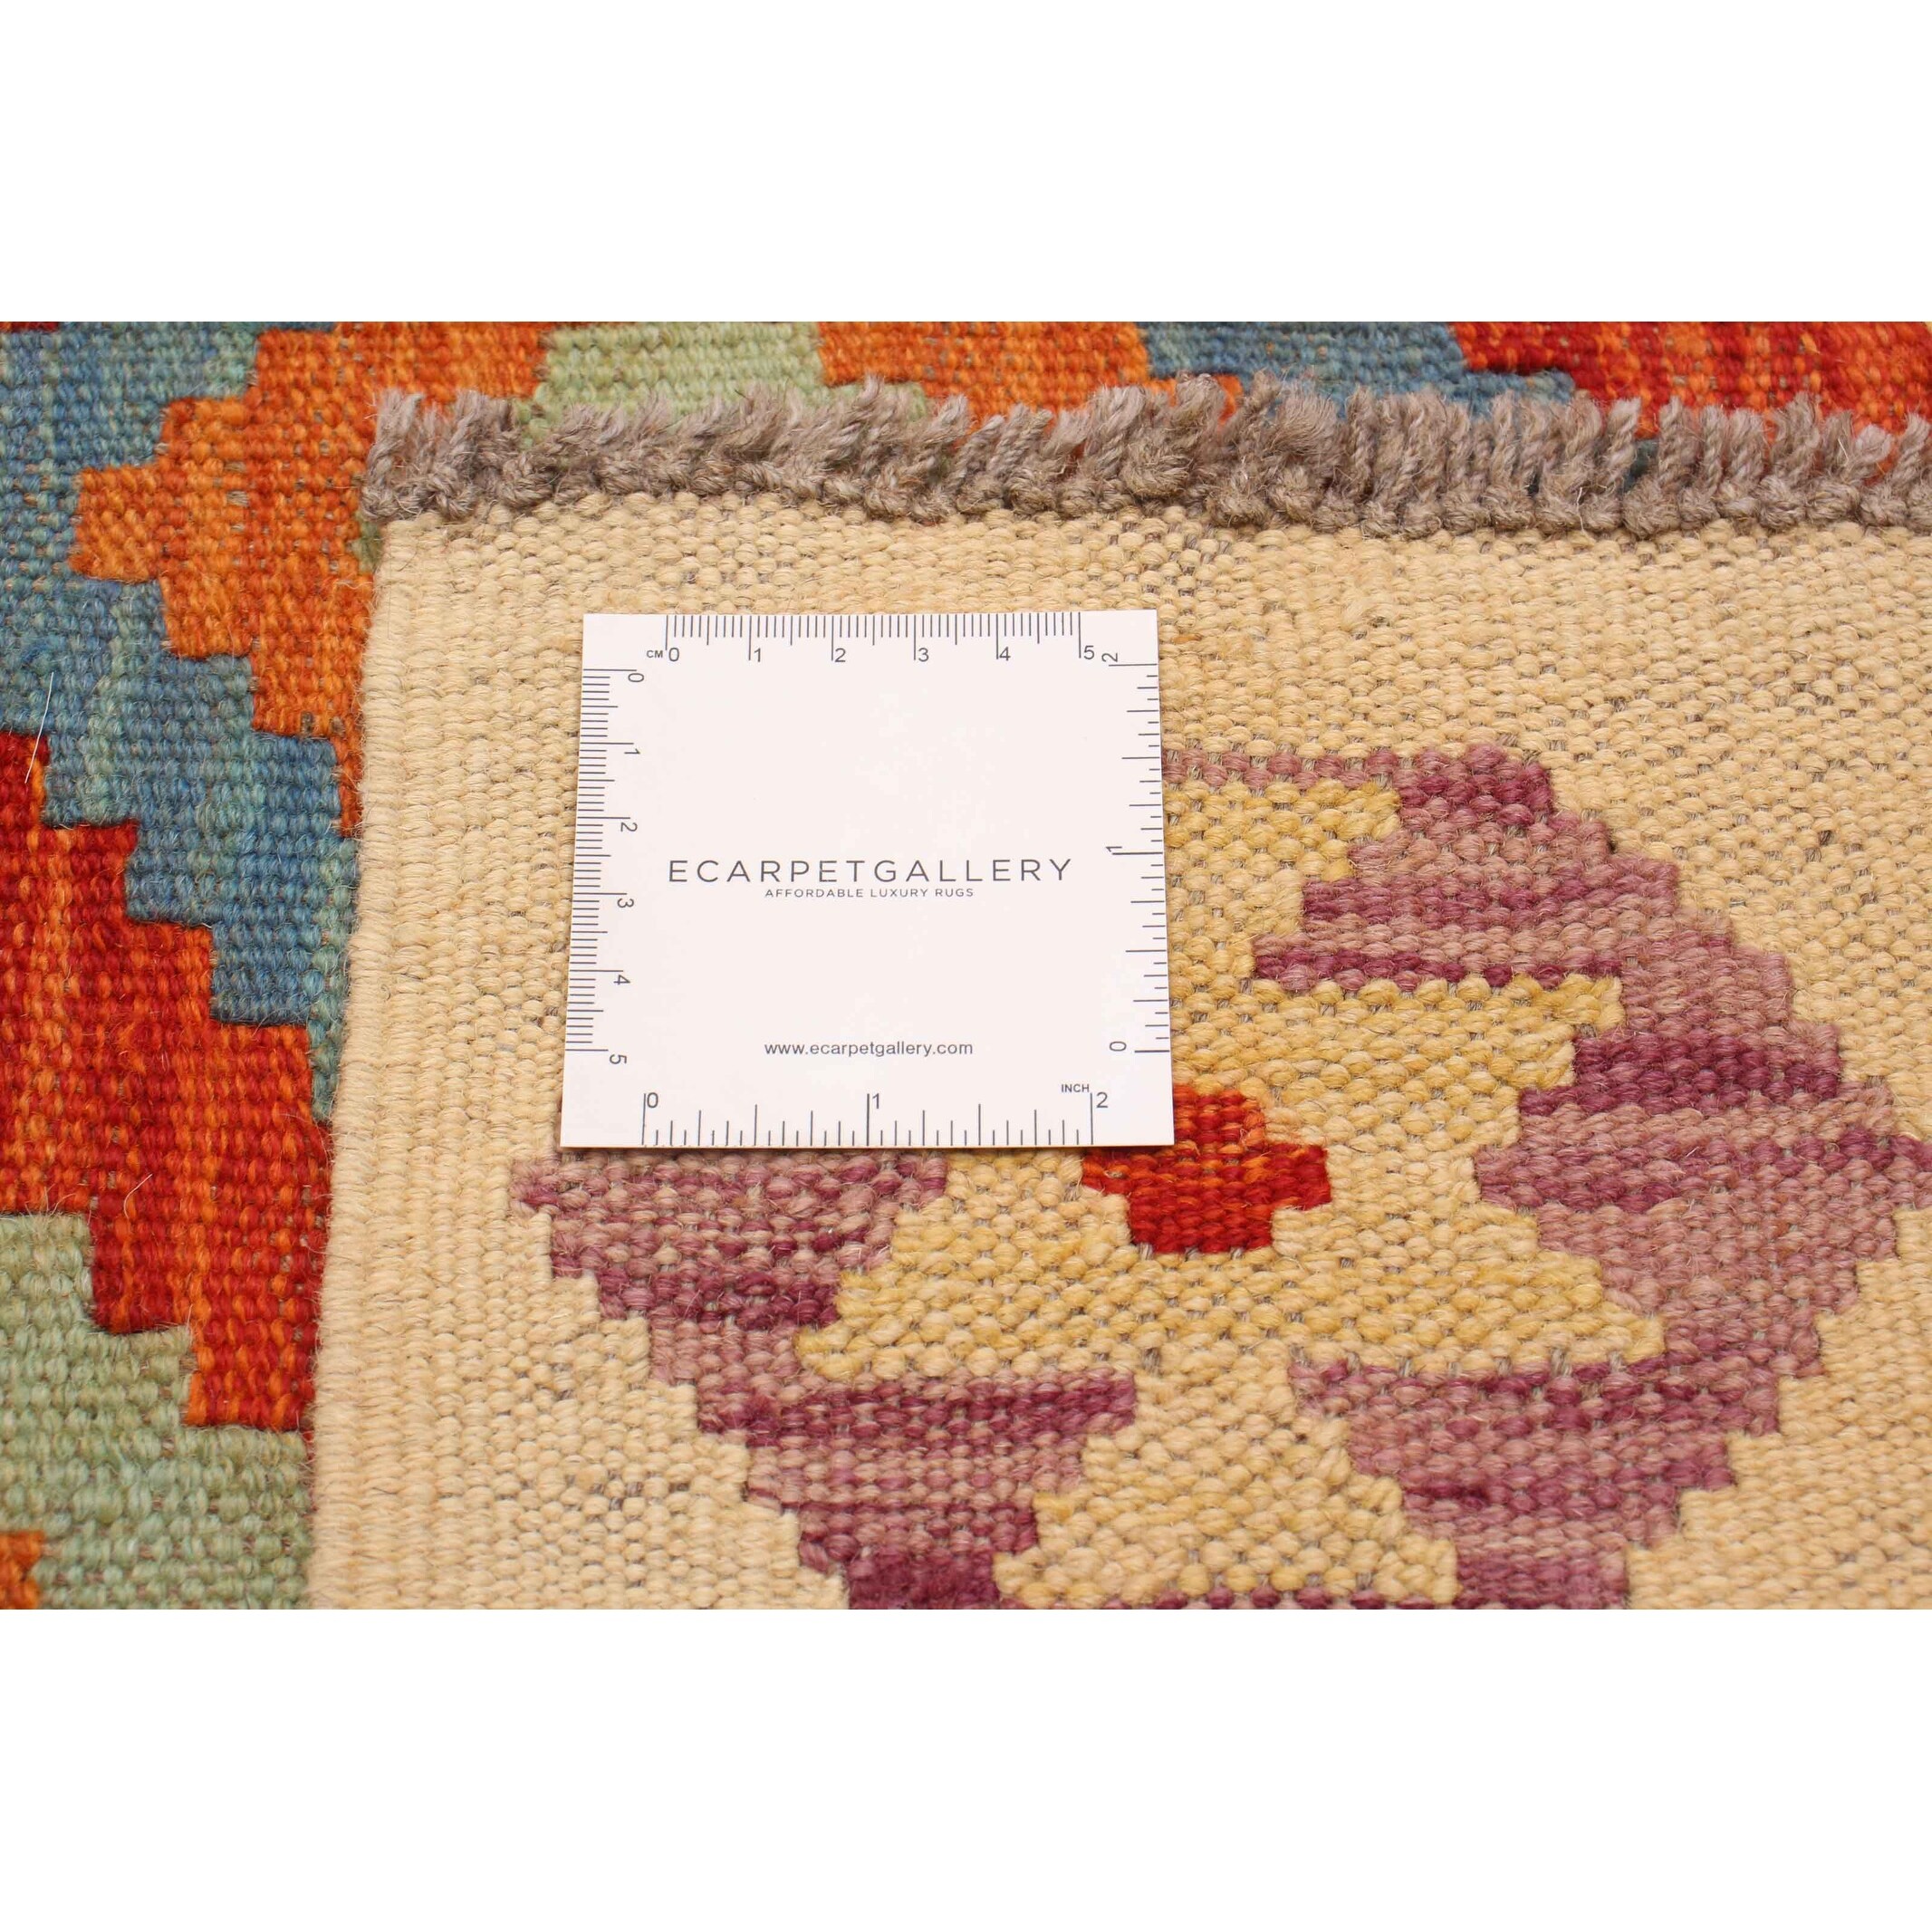 ECARPETGALLERY Flat-Weave Bold and Colorful Red Wool Kilim - 4'11 x 6'8